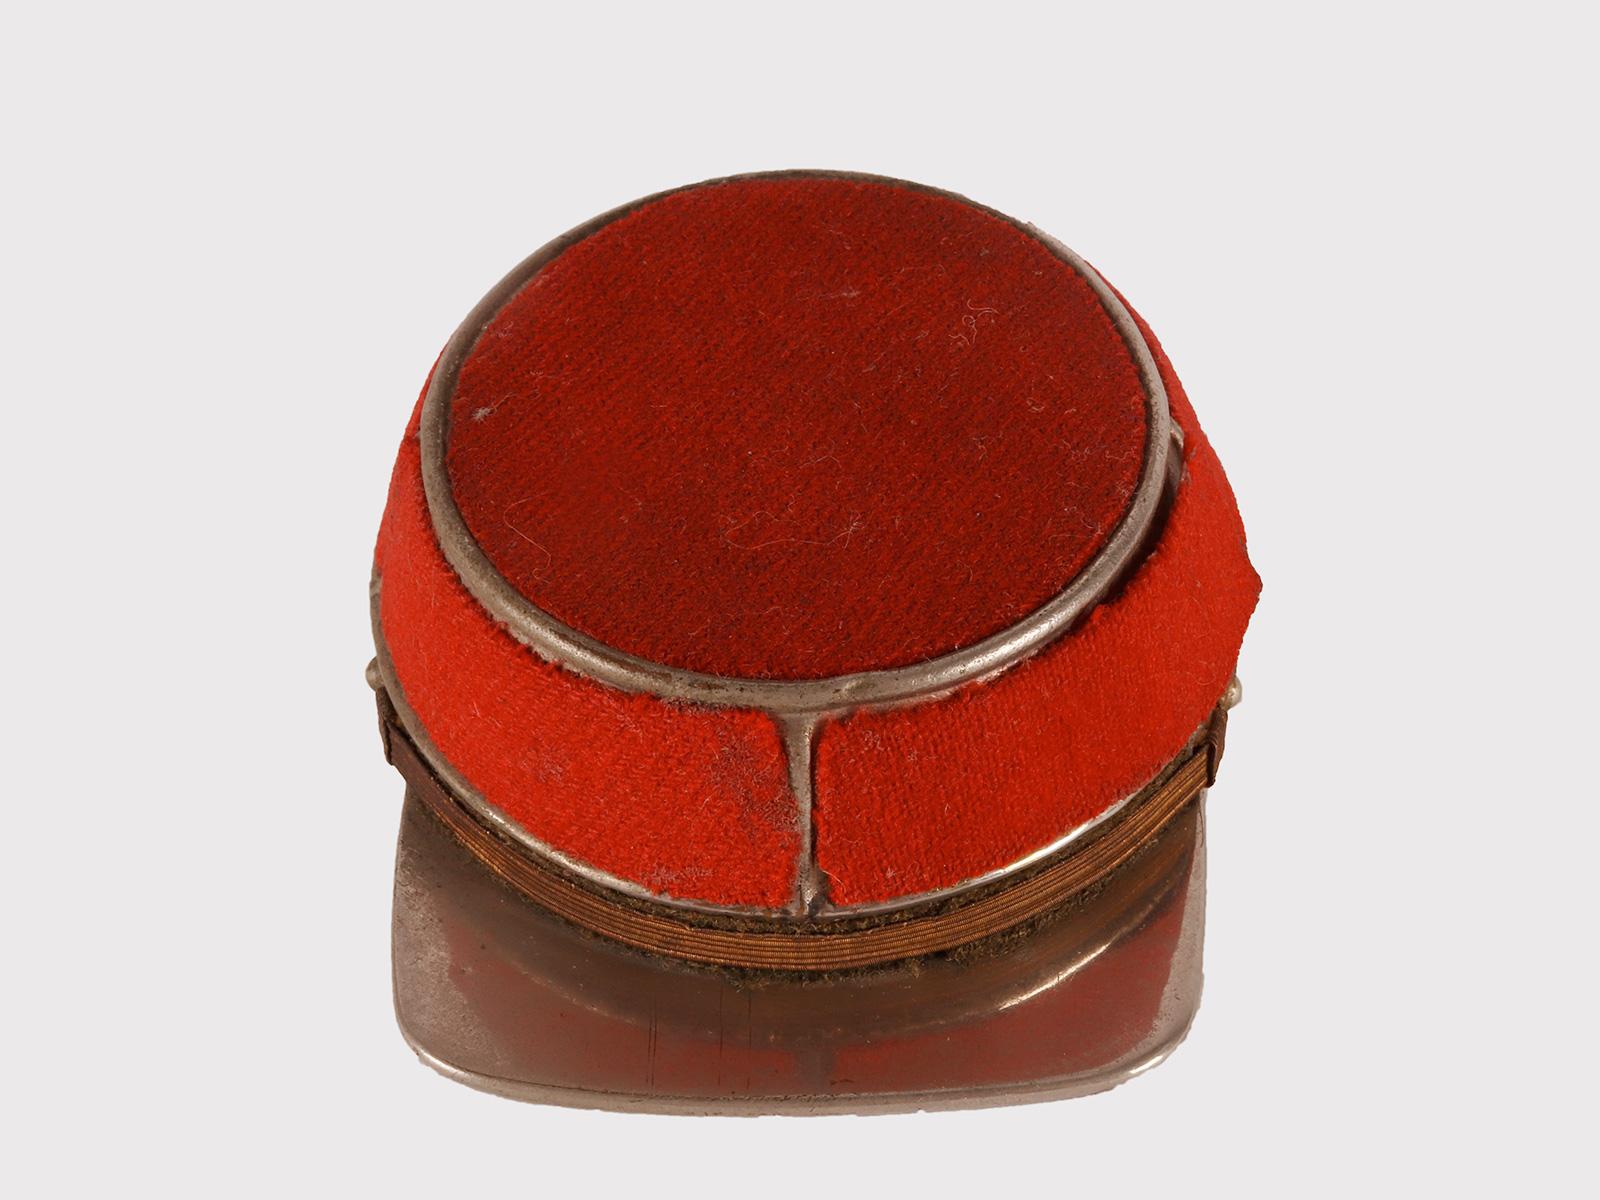 Snuffbox in white metal, brass and fabric, depicting a military cap with visor. This French snuffbox was made in the early 19th century. Hallmarks (E. D. Paris), France circa 1915.